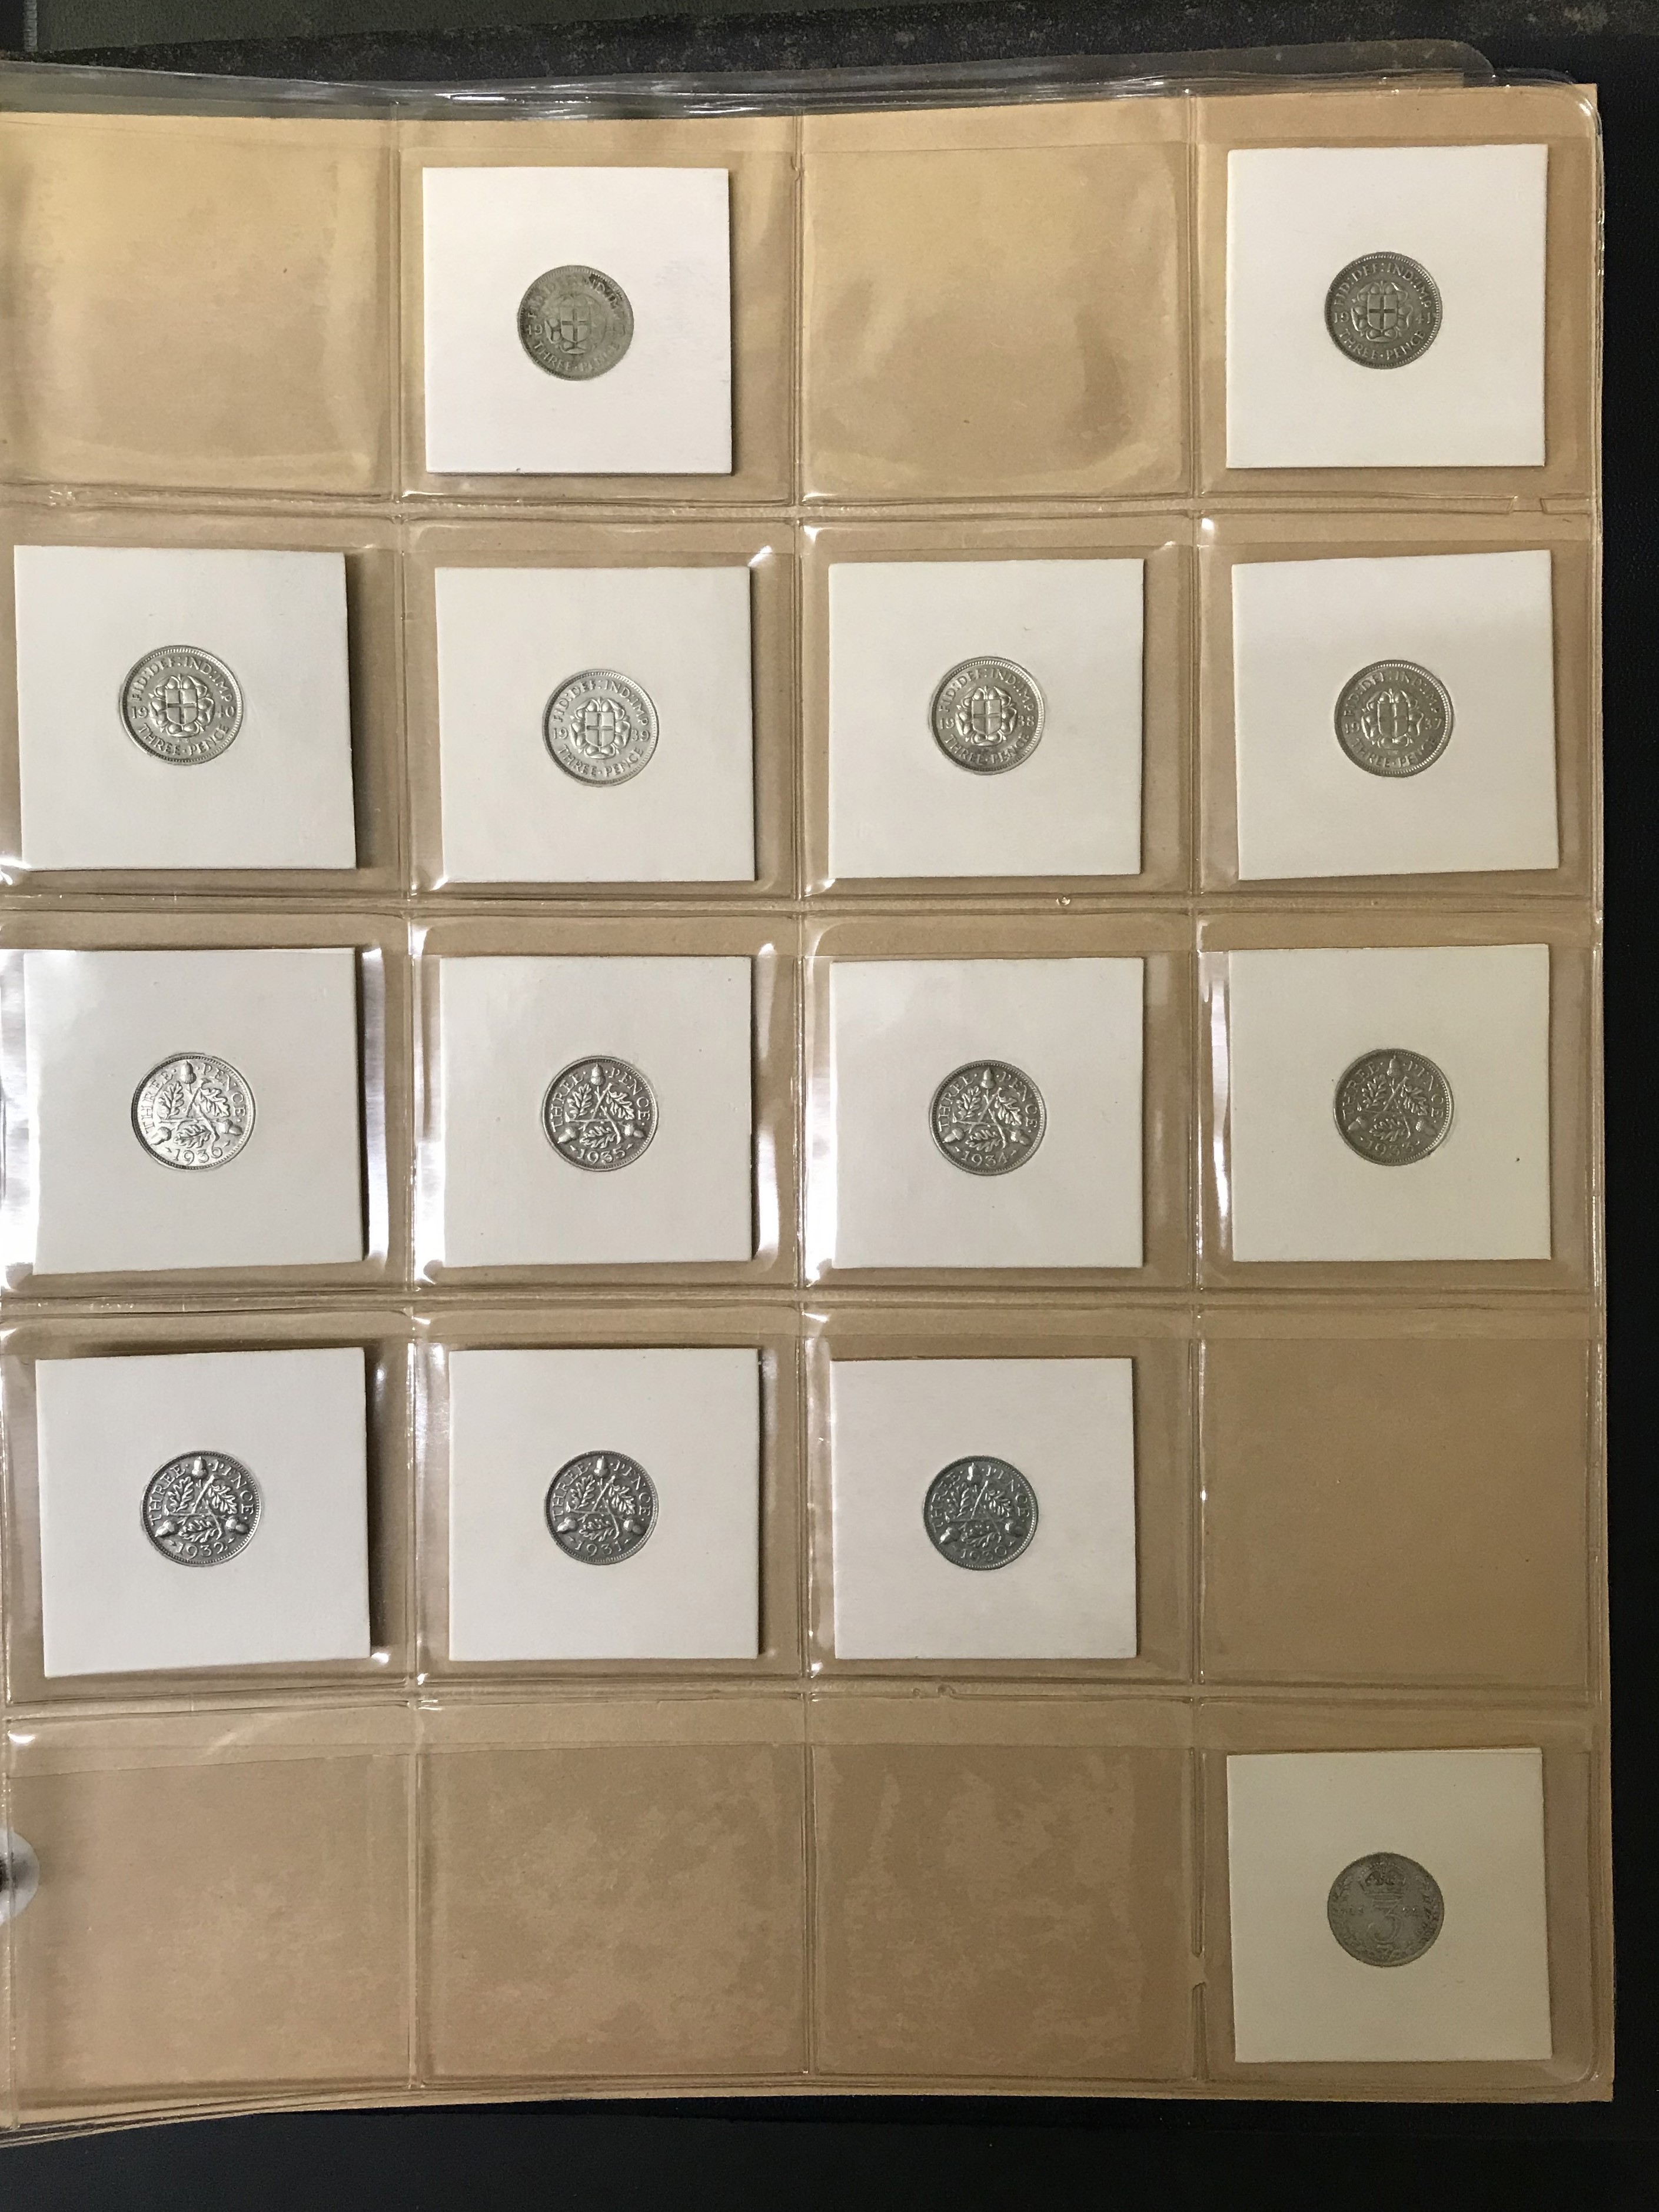 5 albums of coins including silver - Image 12 of 44